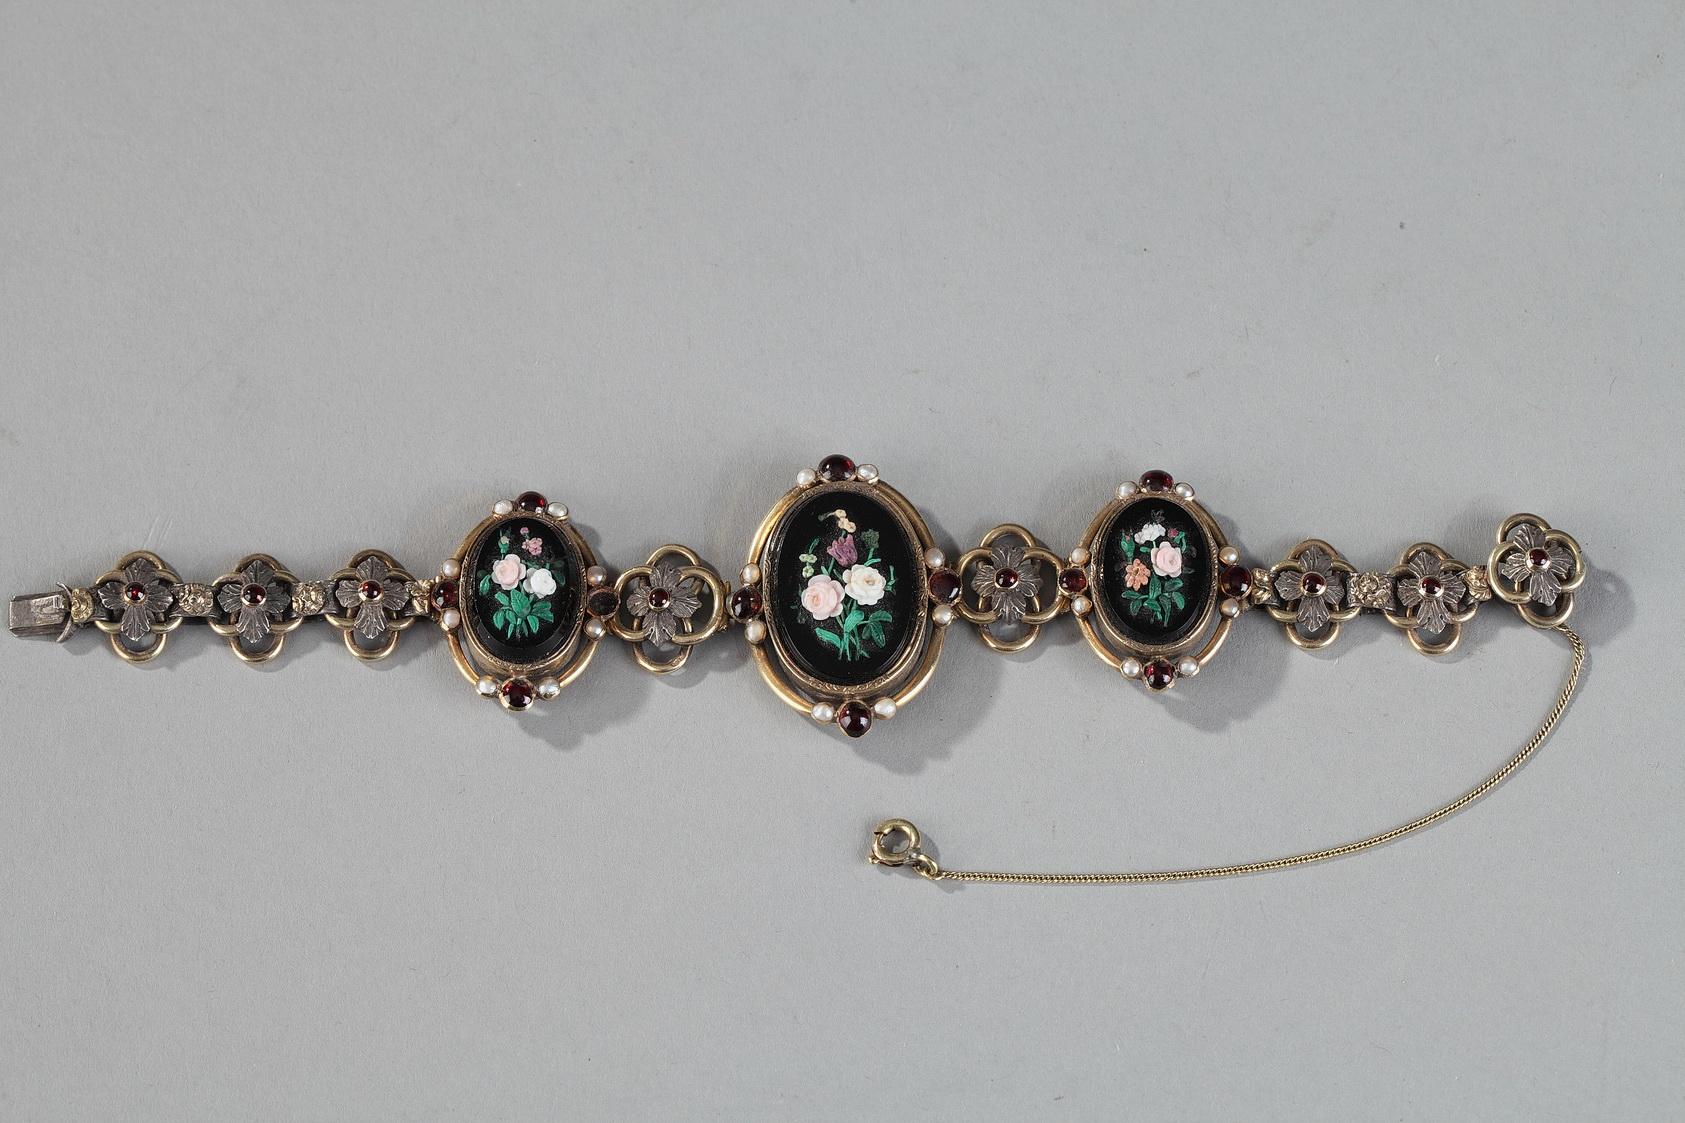 Onyx 19th Century Silver-Gilt Bracelet with Micromosaic Medallions For Sale